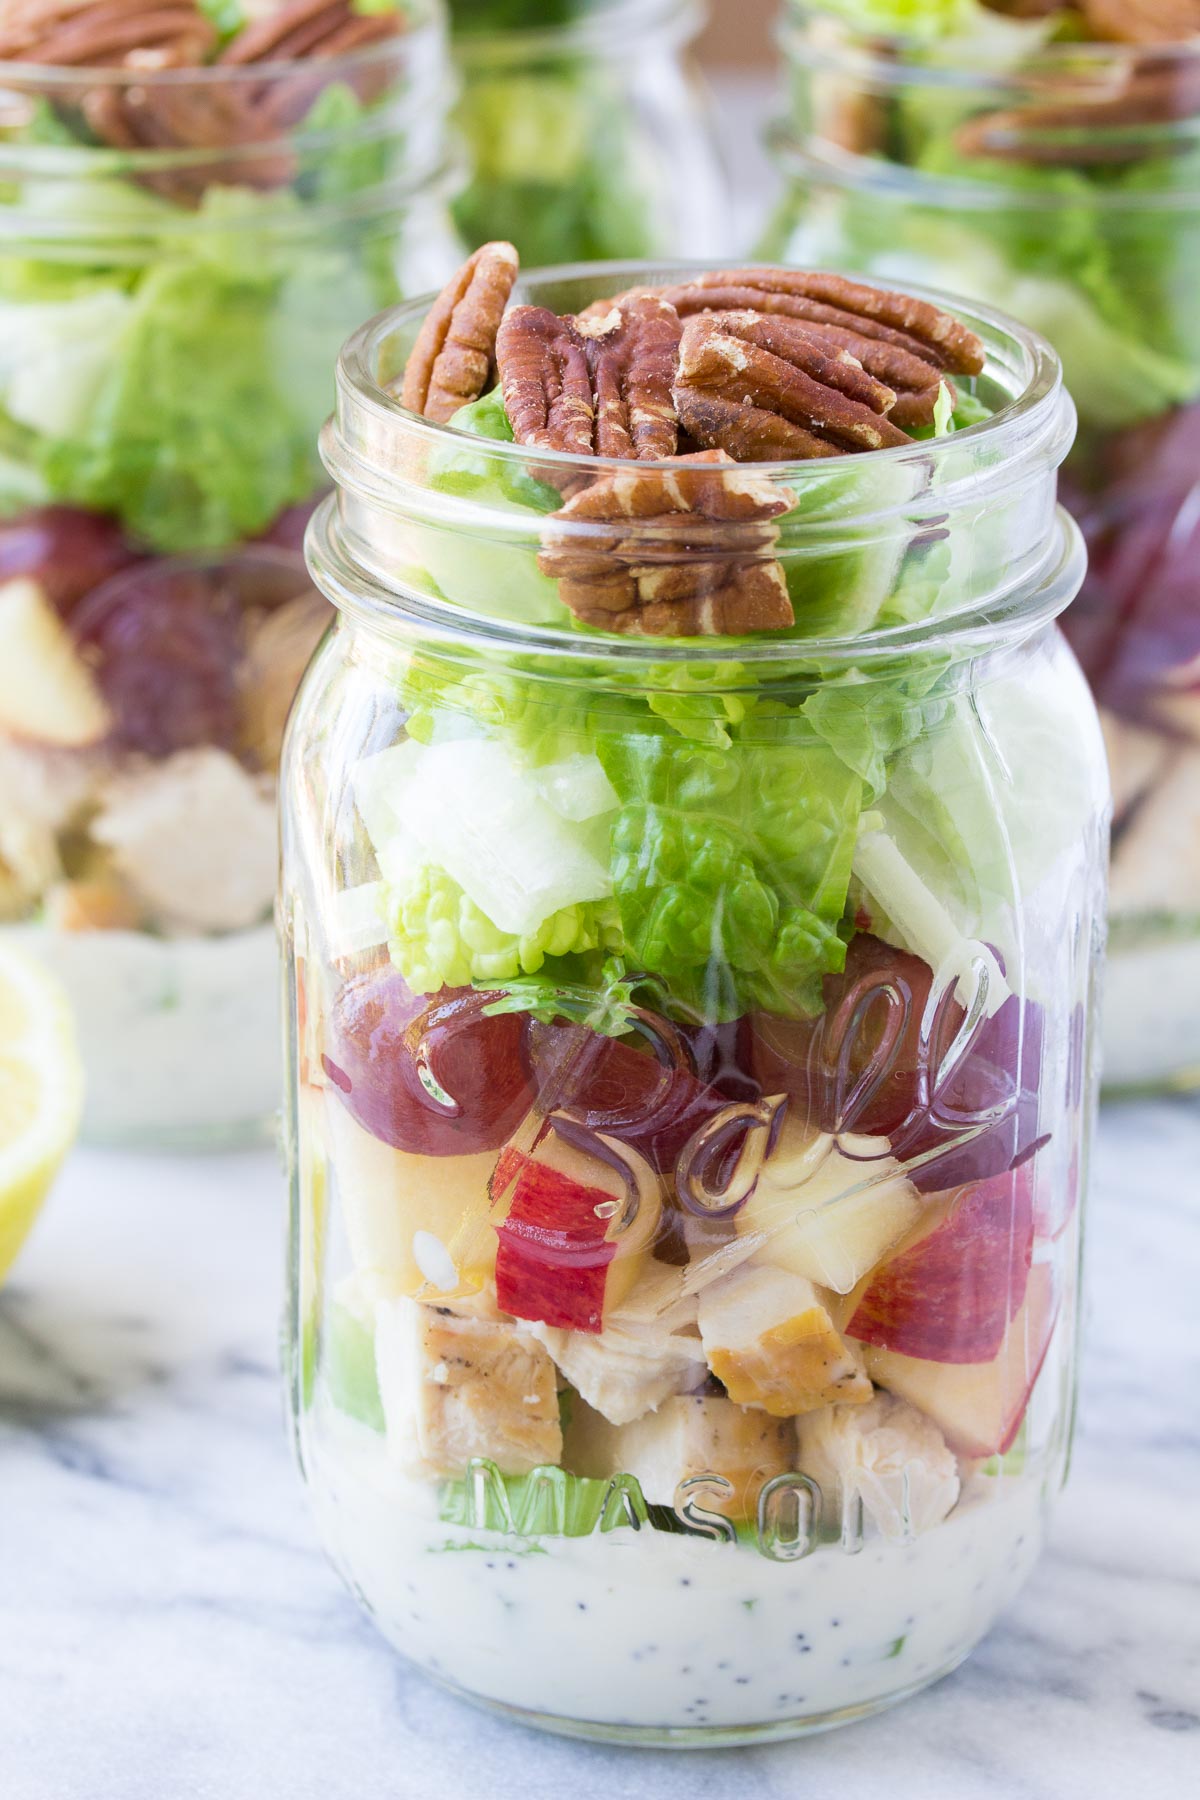 Salad in a jar ready to eat.